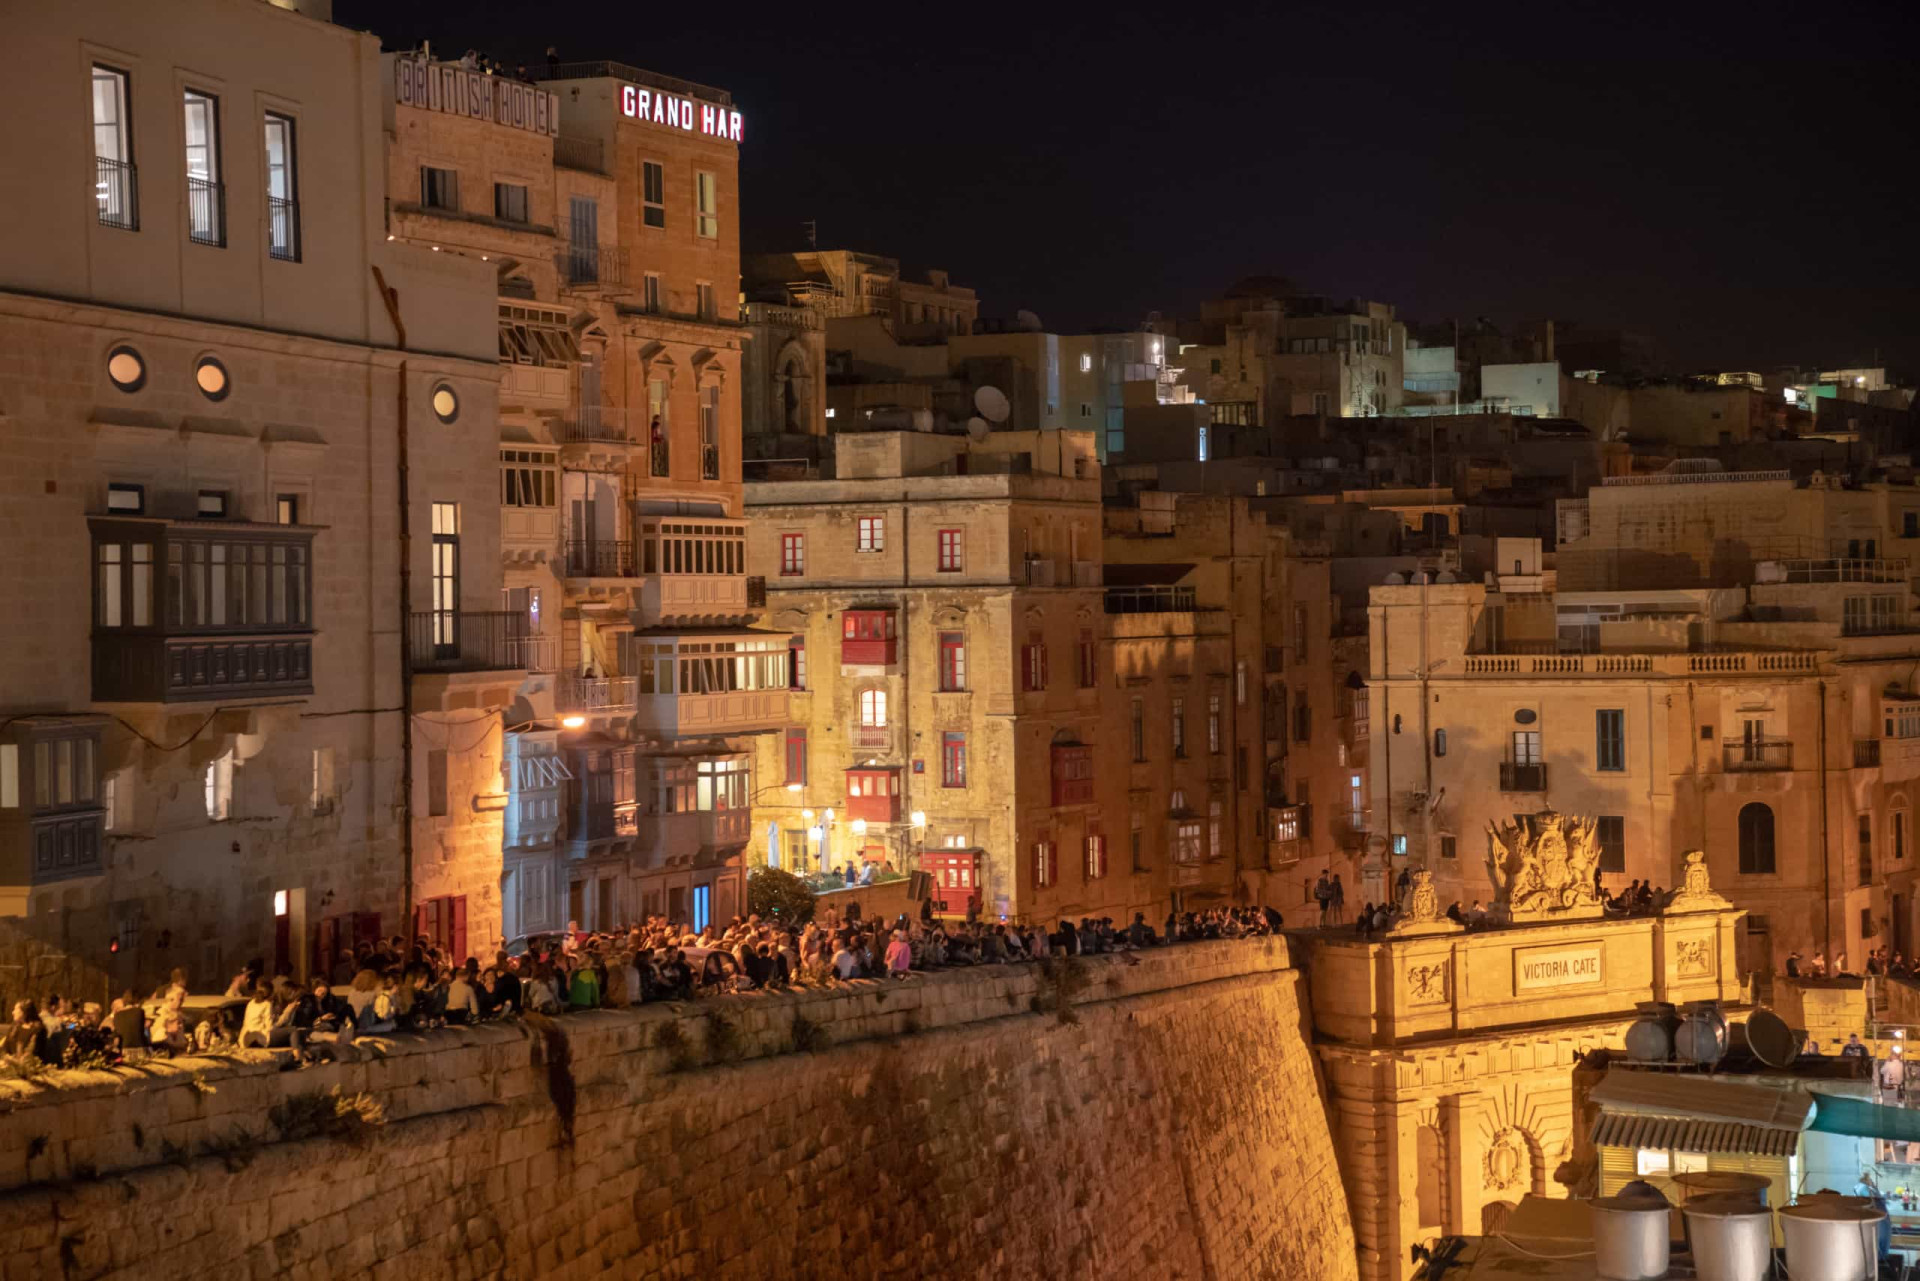 <span>Many people move to Malta in search of a better quality of life, and it's no wonder, since expats report above-average happiness with their work hours (67%) and <a href="https://uk.starsinsider.com/lifestyle/366606/clock-in-luck-out-the-best-countries-for-work-life-balance">work-life balance</a> (72%), according to an </span><a href="https://www.internations.org/magazine/top-10-countries-with-a-great-work-life-balance-39439"><span>Expat Insider</span></a><span> survey. </span><p><a href="https://www.msn.com/en-us/community/channel/vid-7xx8mnucu55yw63we9va2gwr7uihbxwc68fxqp25x6tg4ftibpra?cvid=94631541bc0f4f89bfd59158d696ad7e">Follow us and access great exclusive content every day</a></p>